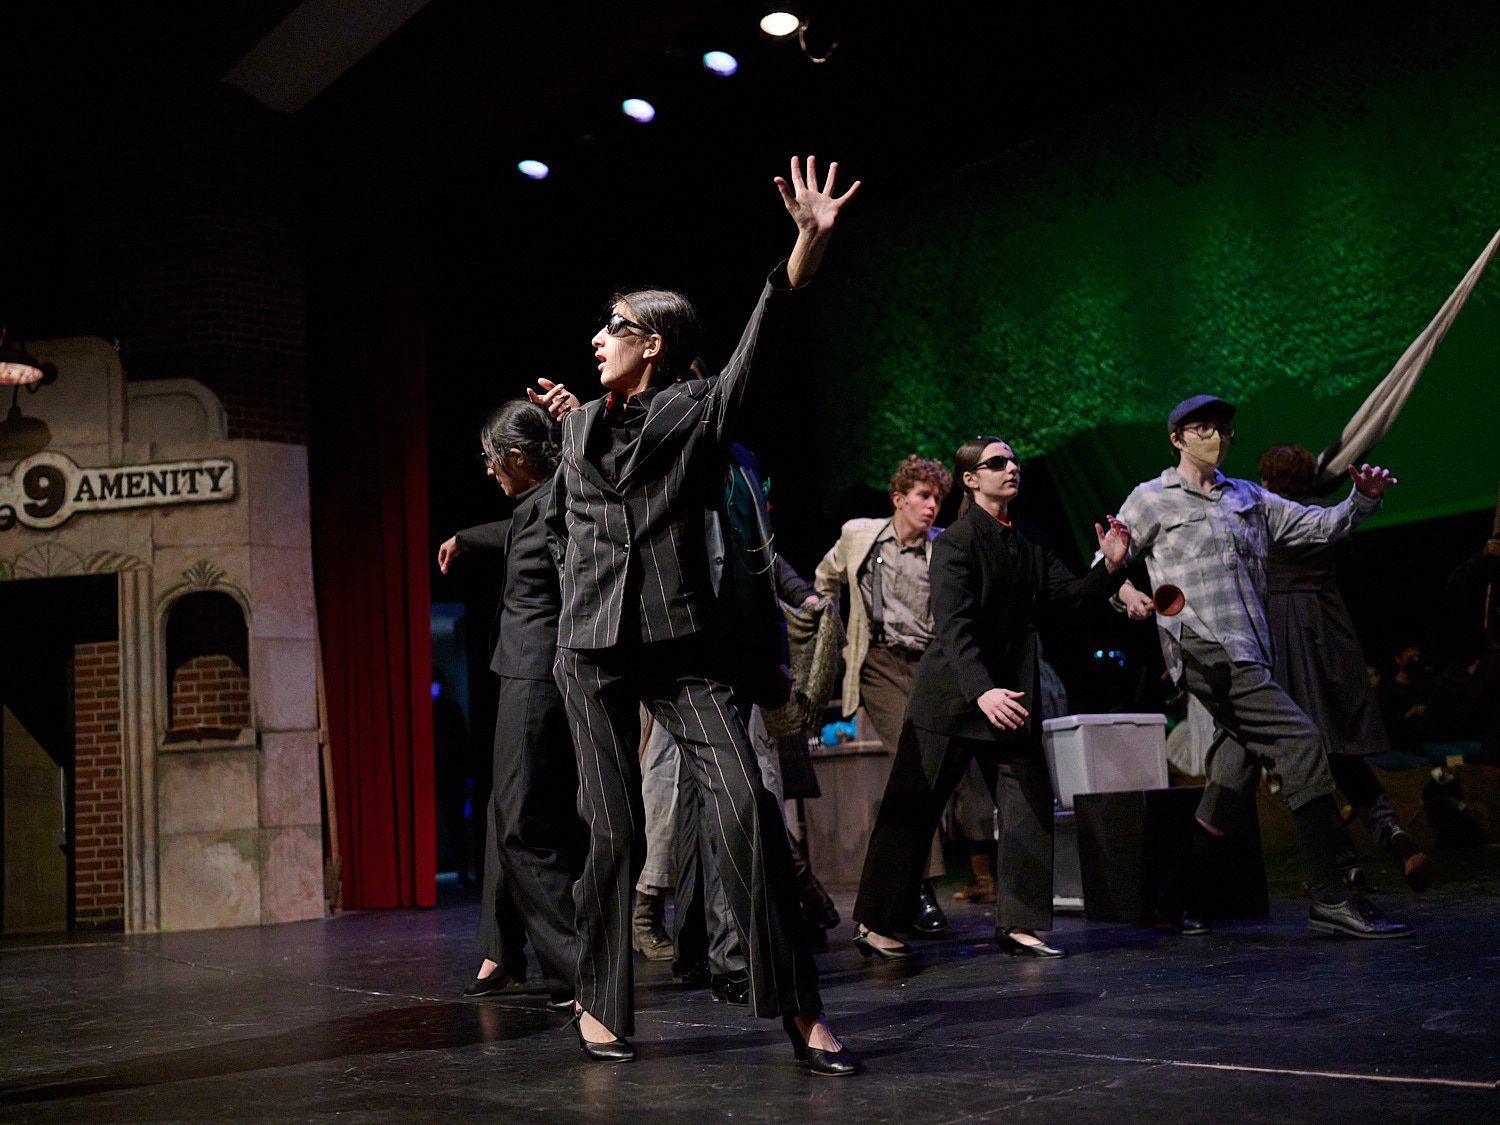  SEWICKLEY, PA, USA - MARCH 2ND 2022: High School students of Sewickley Academy are performing in an annual musical show “Urinetown” running on March 3rd-5th 2022. Avni Kathju 